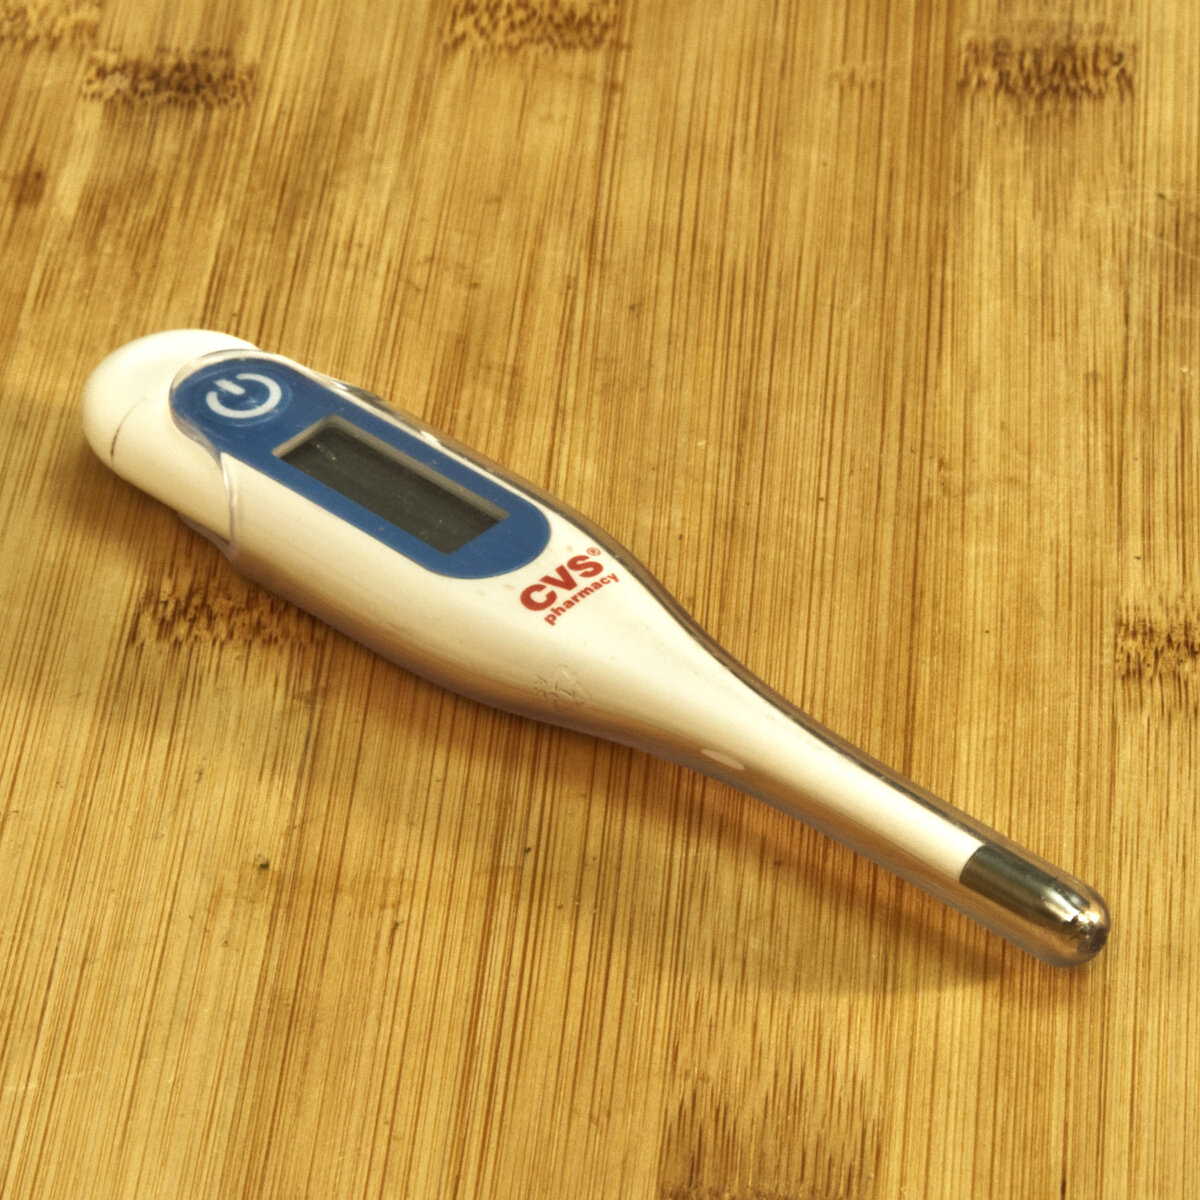 Oral Medical Thermometer